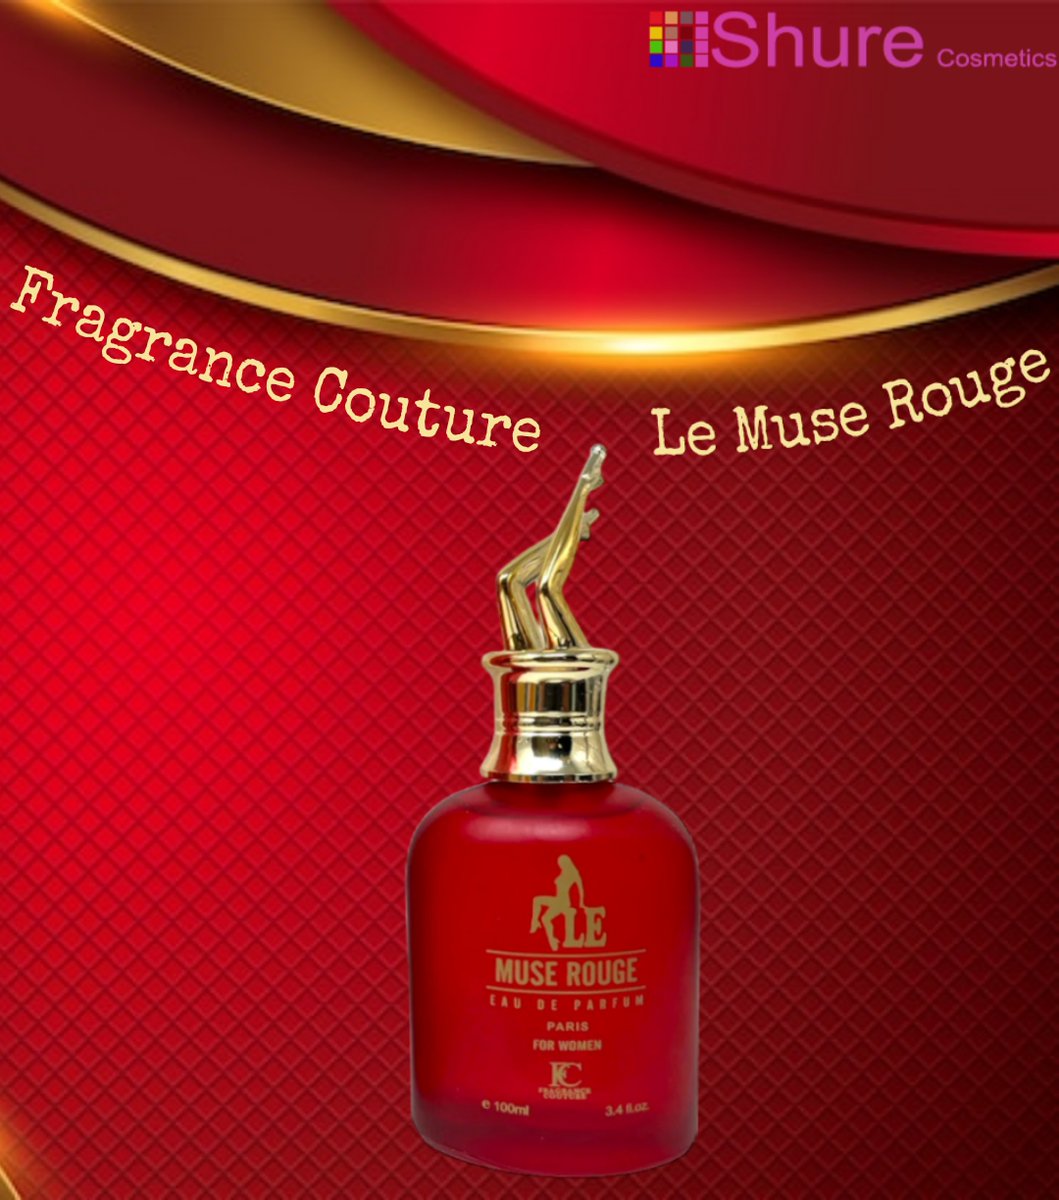 📢New Arrival... Le Muse Rouge (Ladies 100ml EDP) Fragrance Couture
For More on Our Website: shure-cosmetics.co.uk/fragrance-cout…
#perfumes #perfumecollection #fragrance #parfum #perfumeaddict #scent #perfumeshop #perfumelover #fragancias #scentoftheday #eaudeparfum #m #fragrancelover